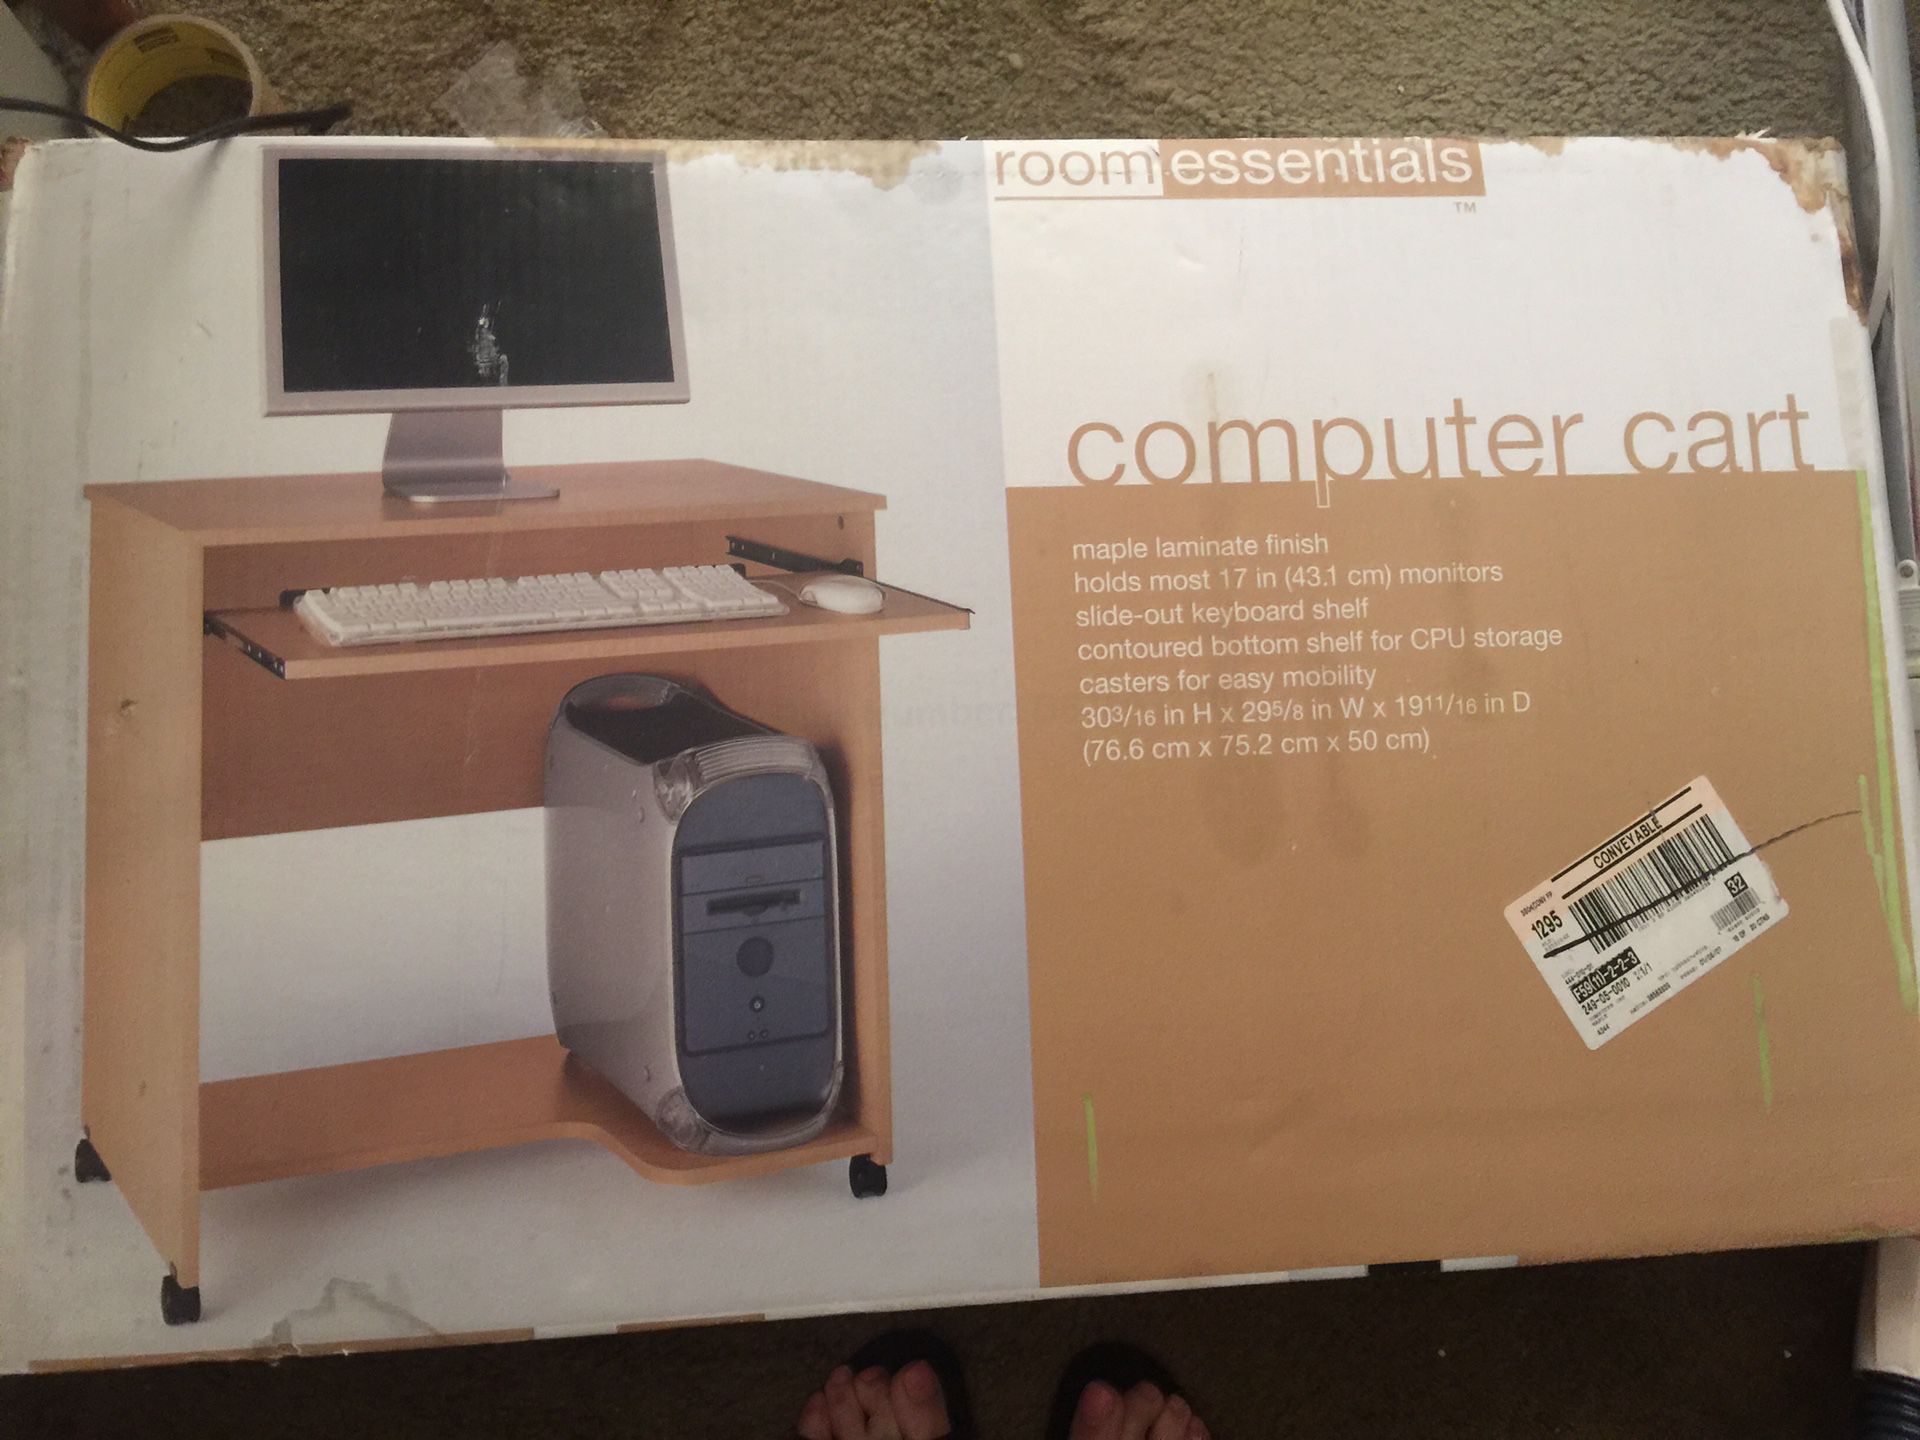 Computer cart by Room Essentials. New. In unopened box. See photo for details, measurements.